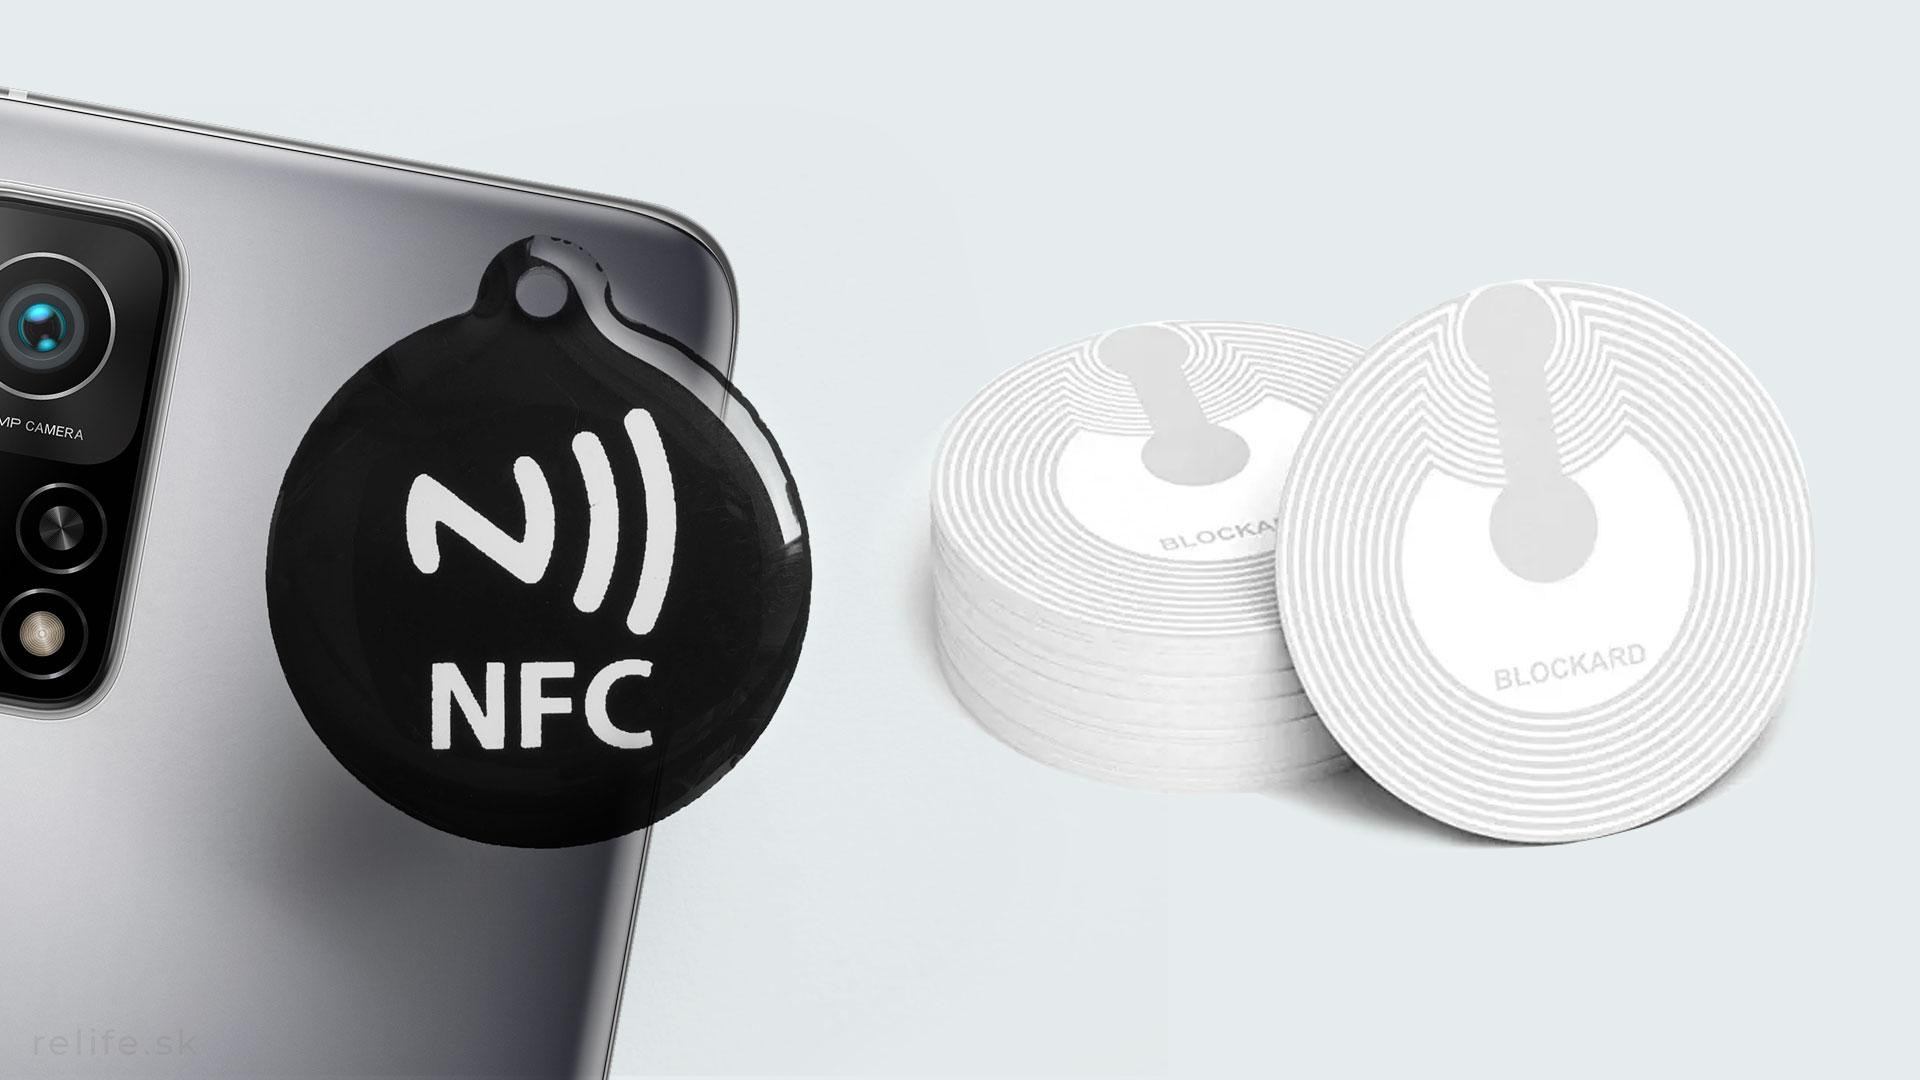 What Are NFC Tags?